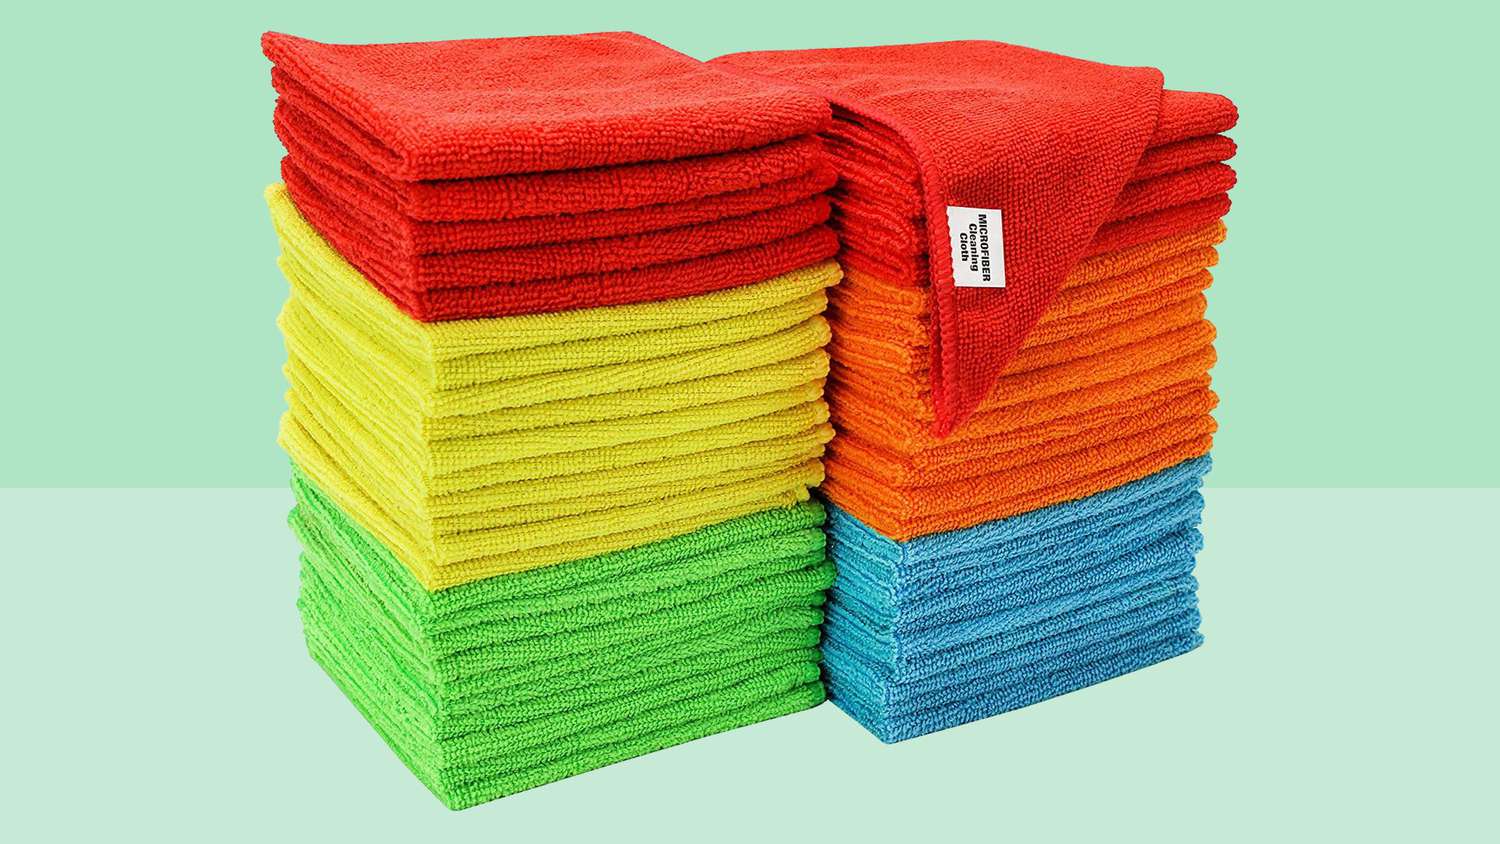 5 Extra Thick Microfiber Cleaning Cloths with 5 Bright Colors Super Absorbent